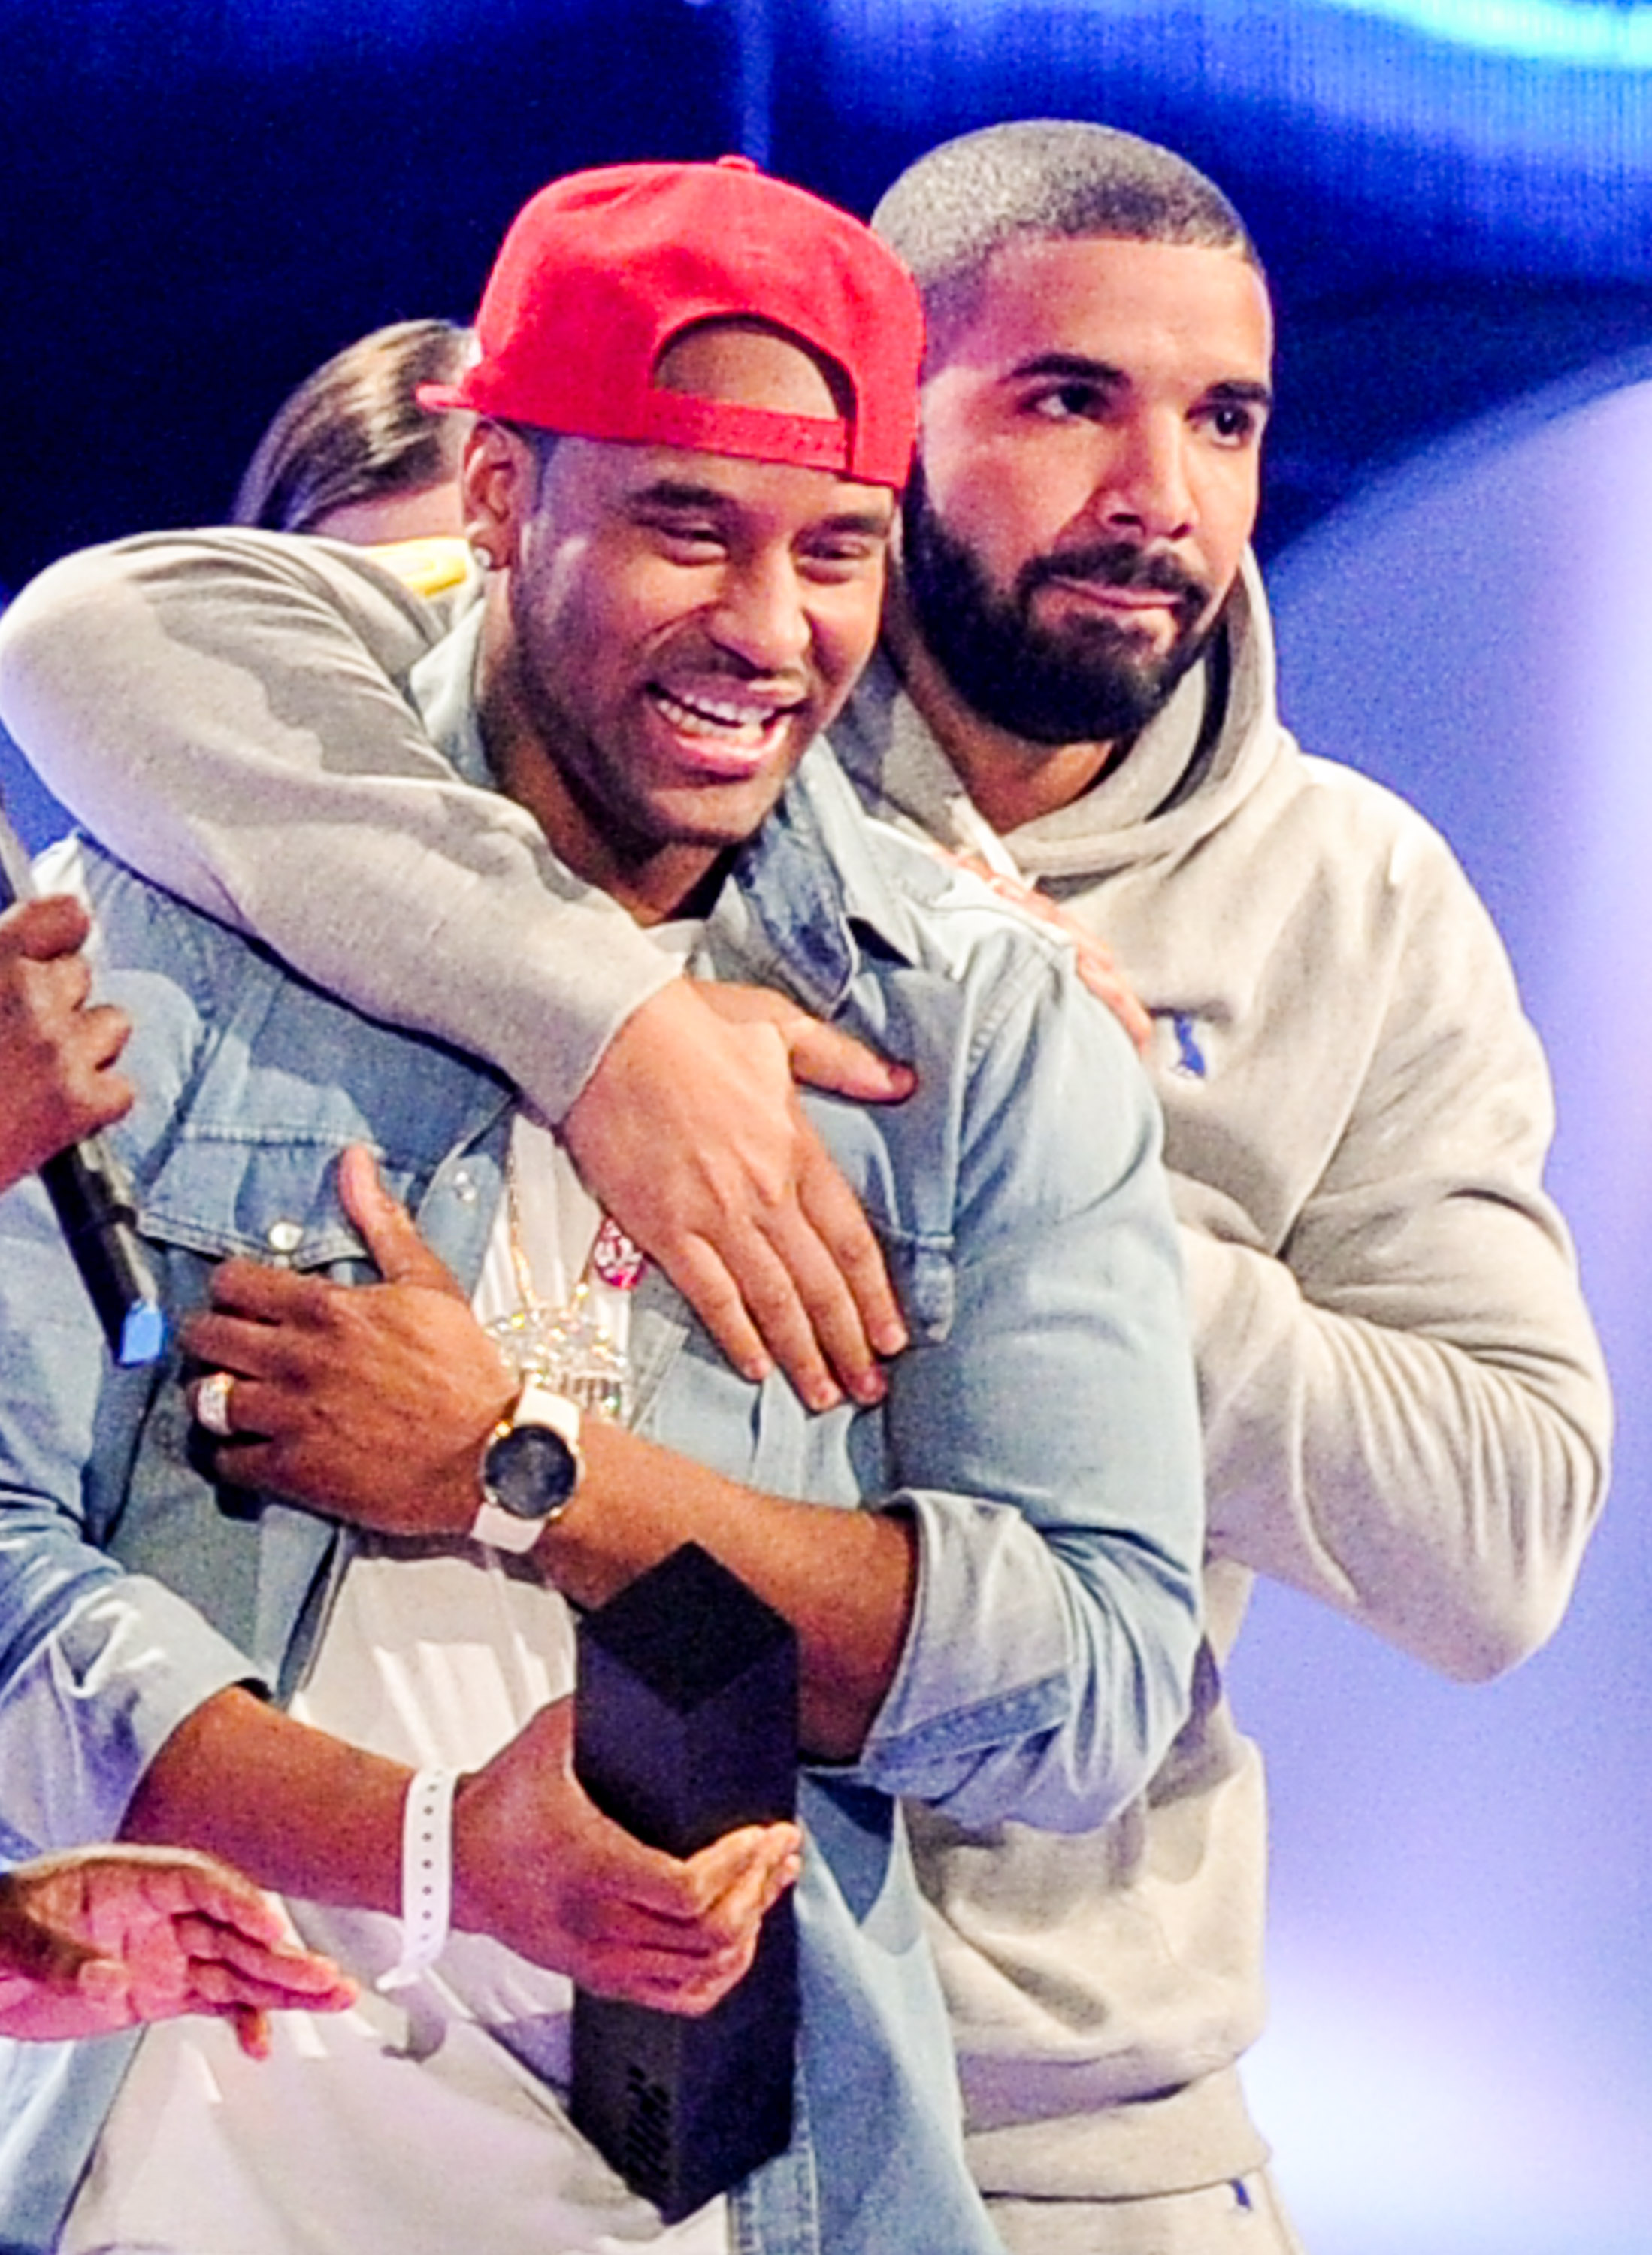 P Reign and Drake at the 2015 Much Music Awards